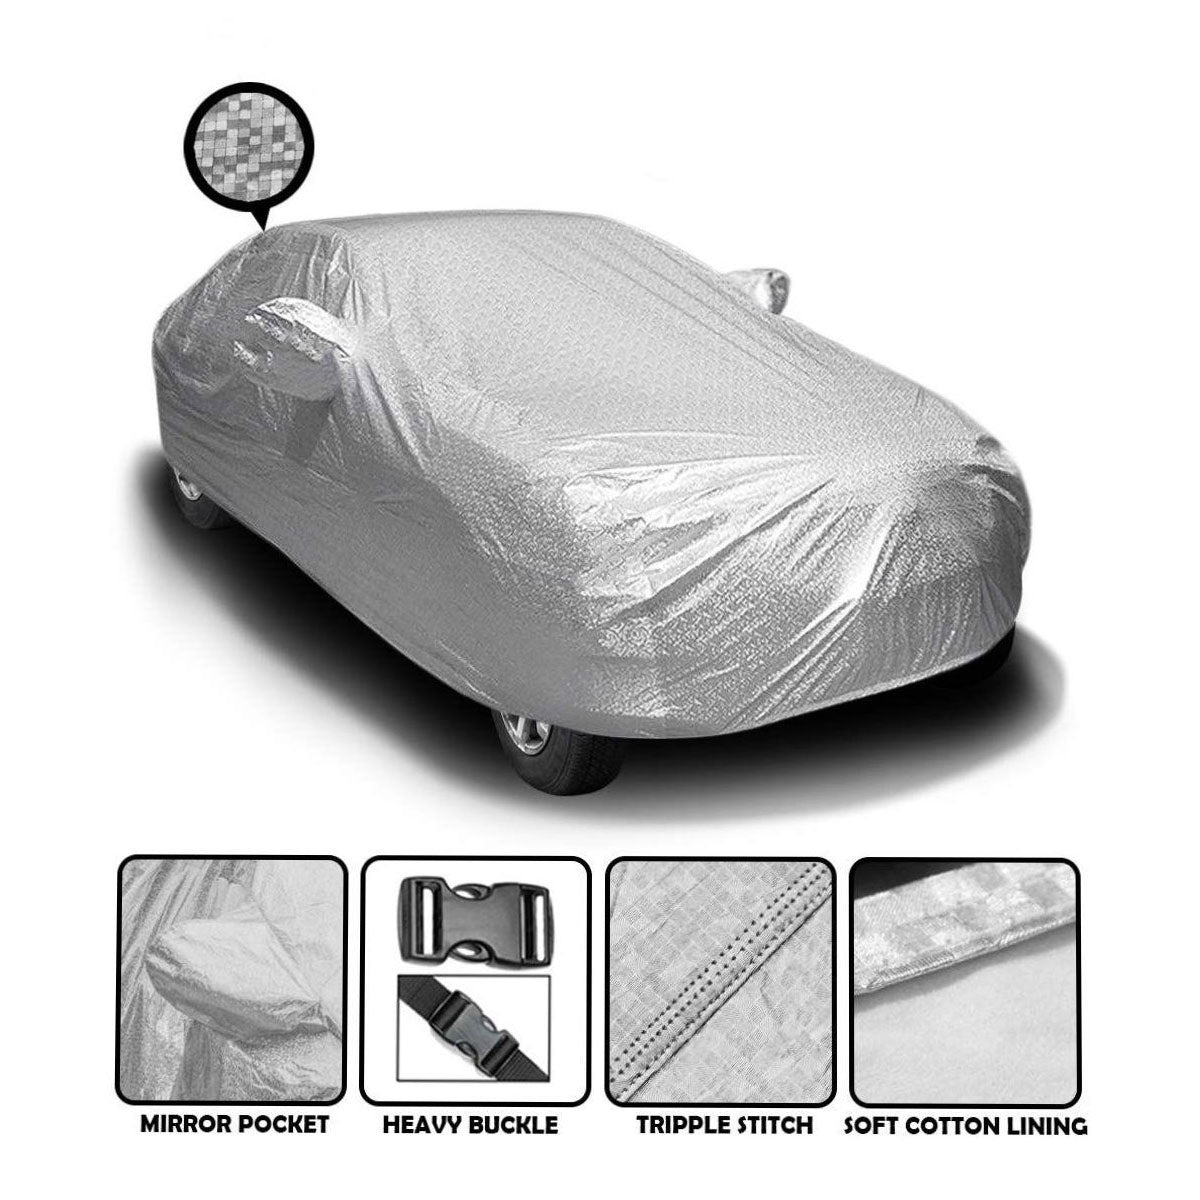 Oshotto Spyro Silver Anti Reflective, dustproof and Water Proof Car Body Cover with Mirror Pockets For Tata Tiago